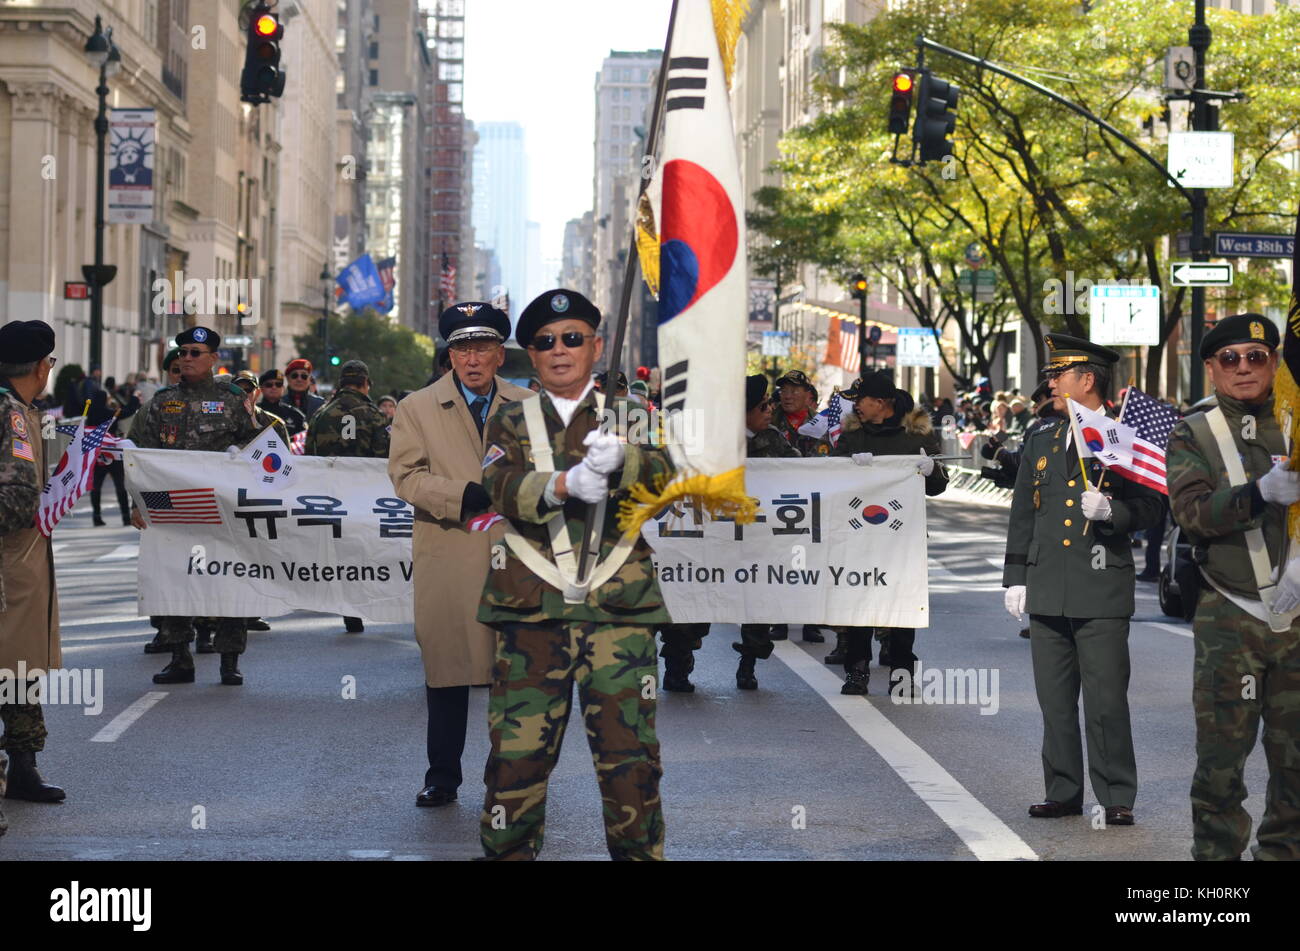 New York City, USA. 11th Nov, 2017. Veterans Day Parade on 5th Avenue in New York City. The largest Veterans Day event in the nation featuring tens of thousands of marchers, including more than 300 units. Credit: Ryan Rahman/Alamy Live News Stock Photo